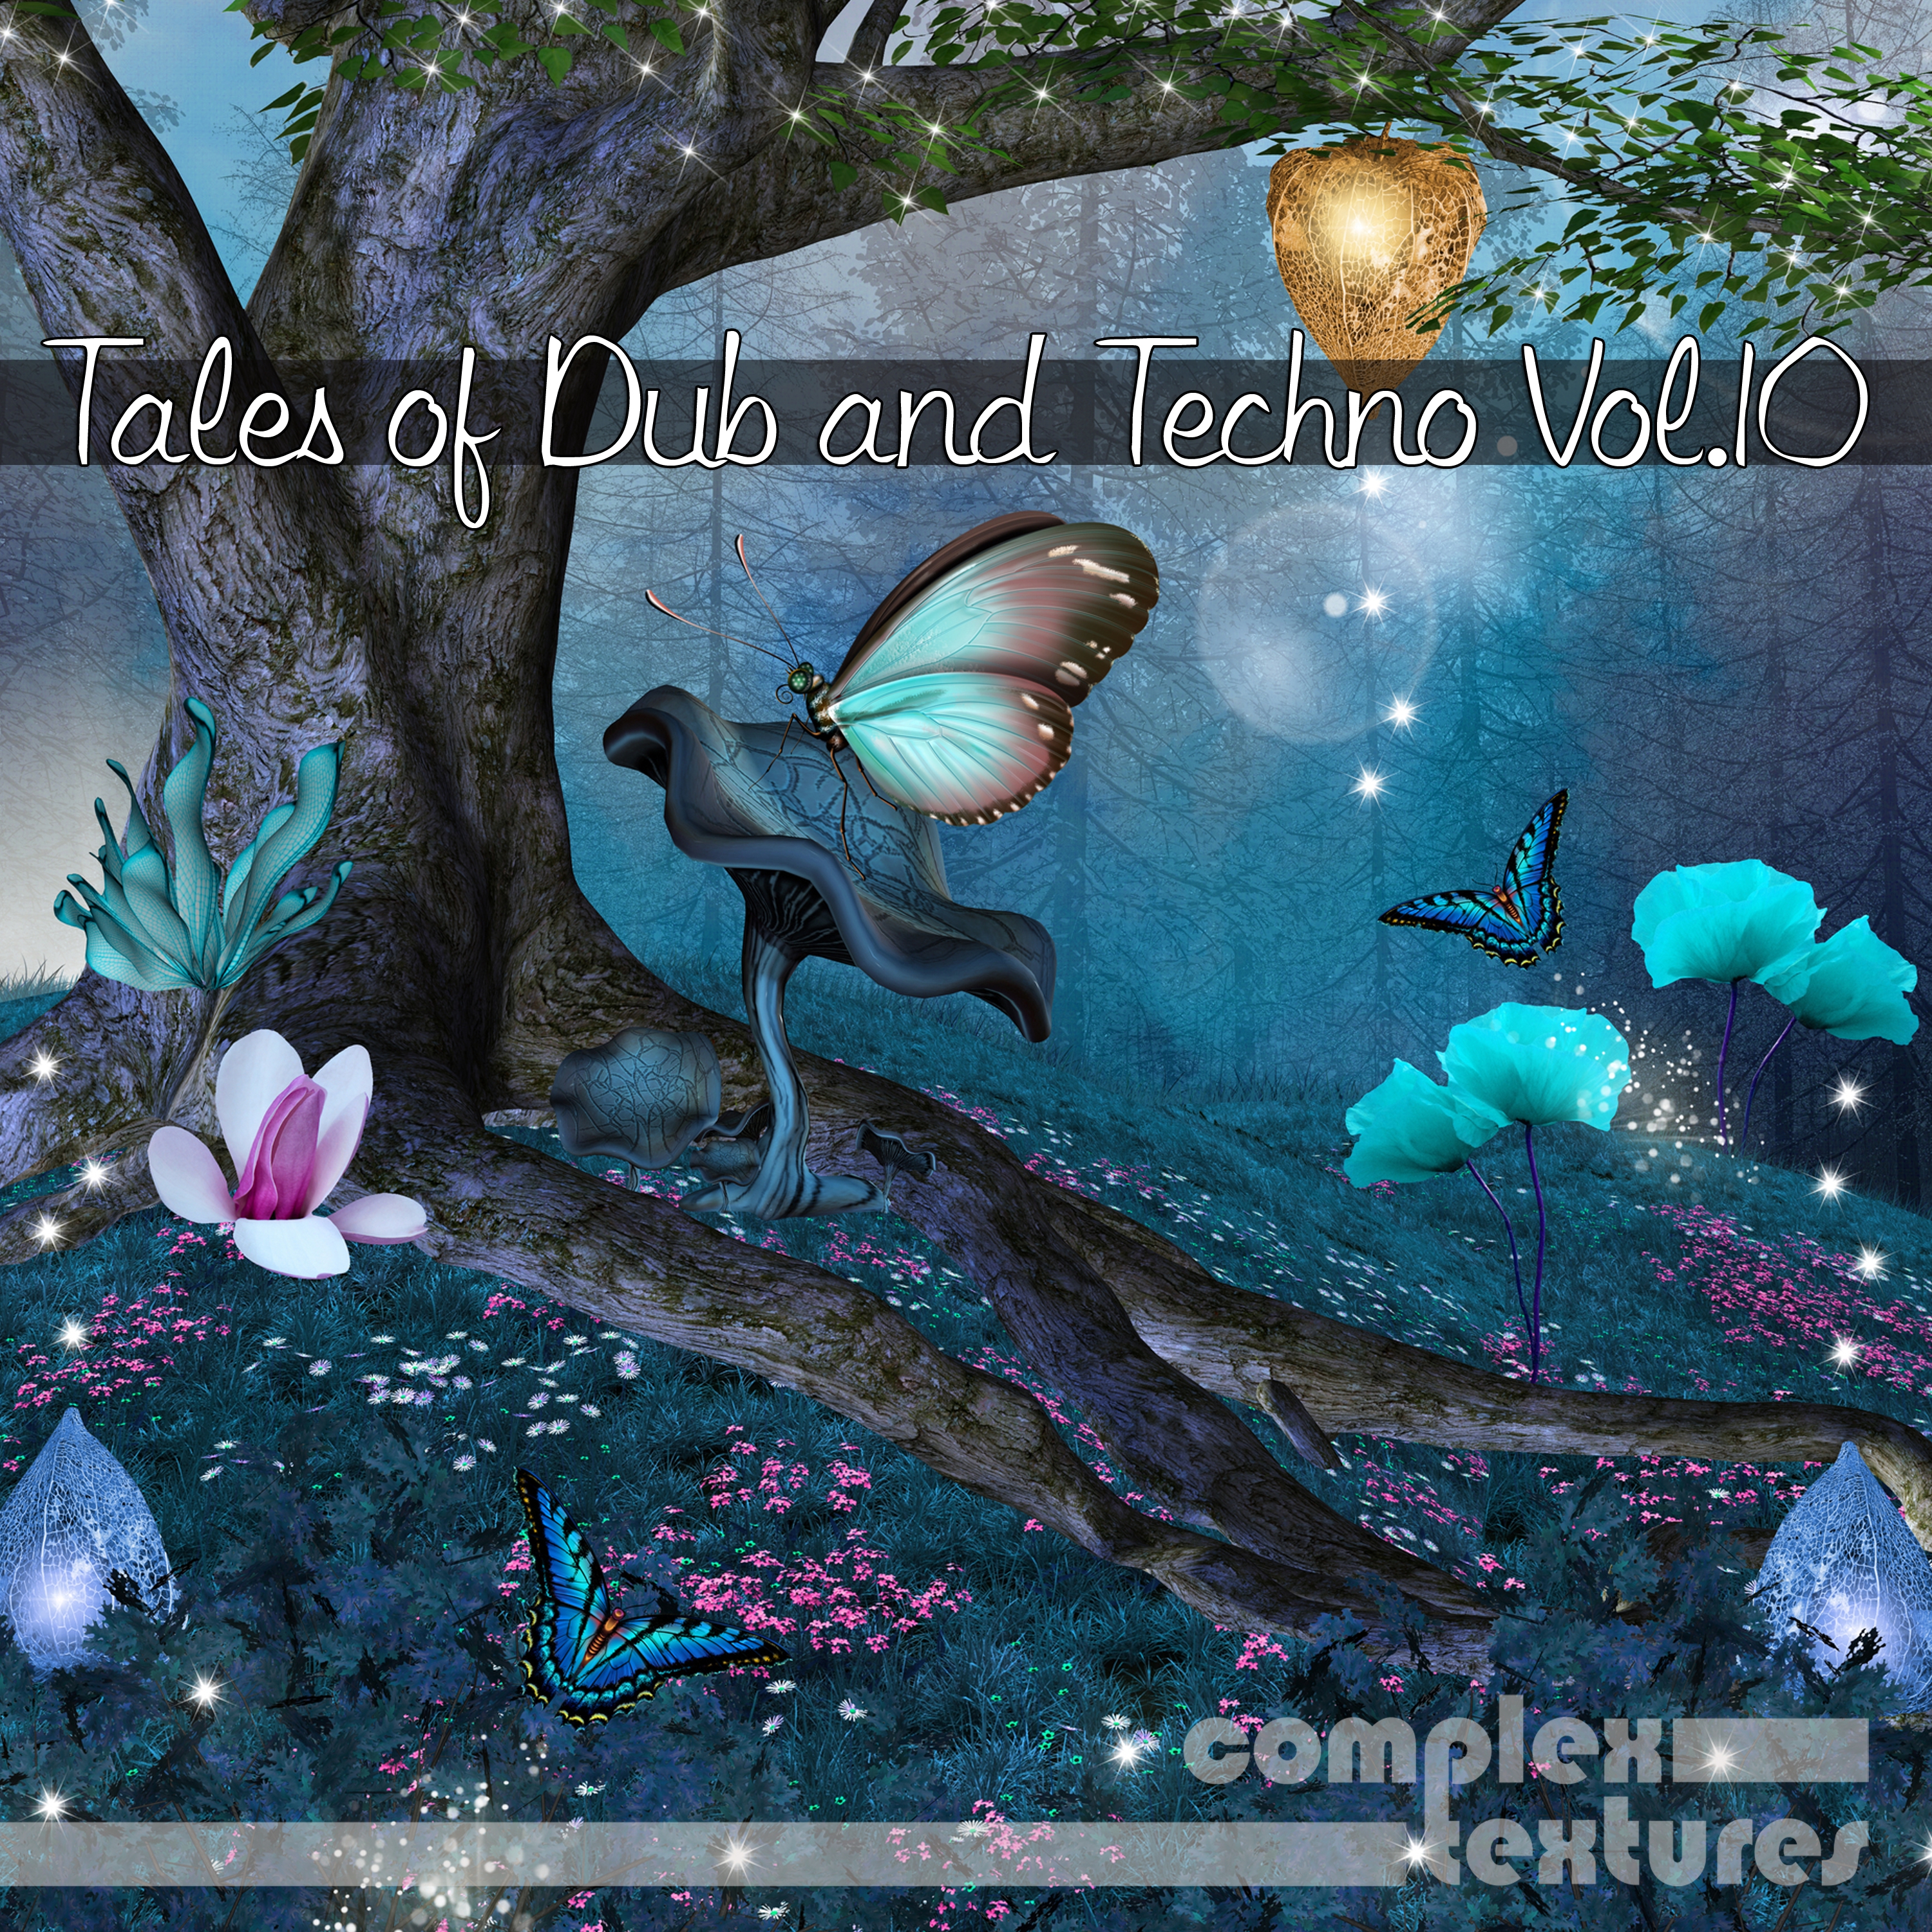 Tales of Dub and Techno, Vol. 10